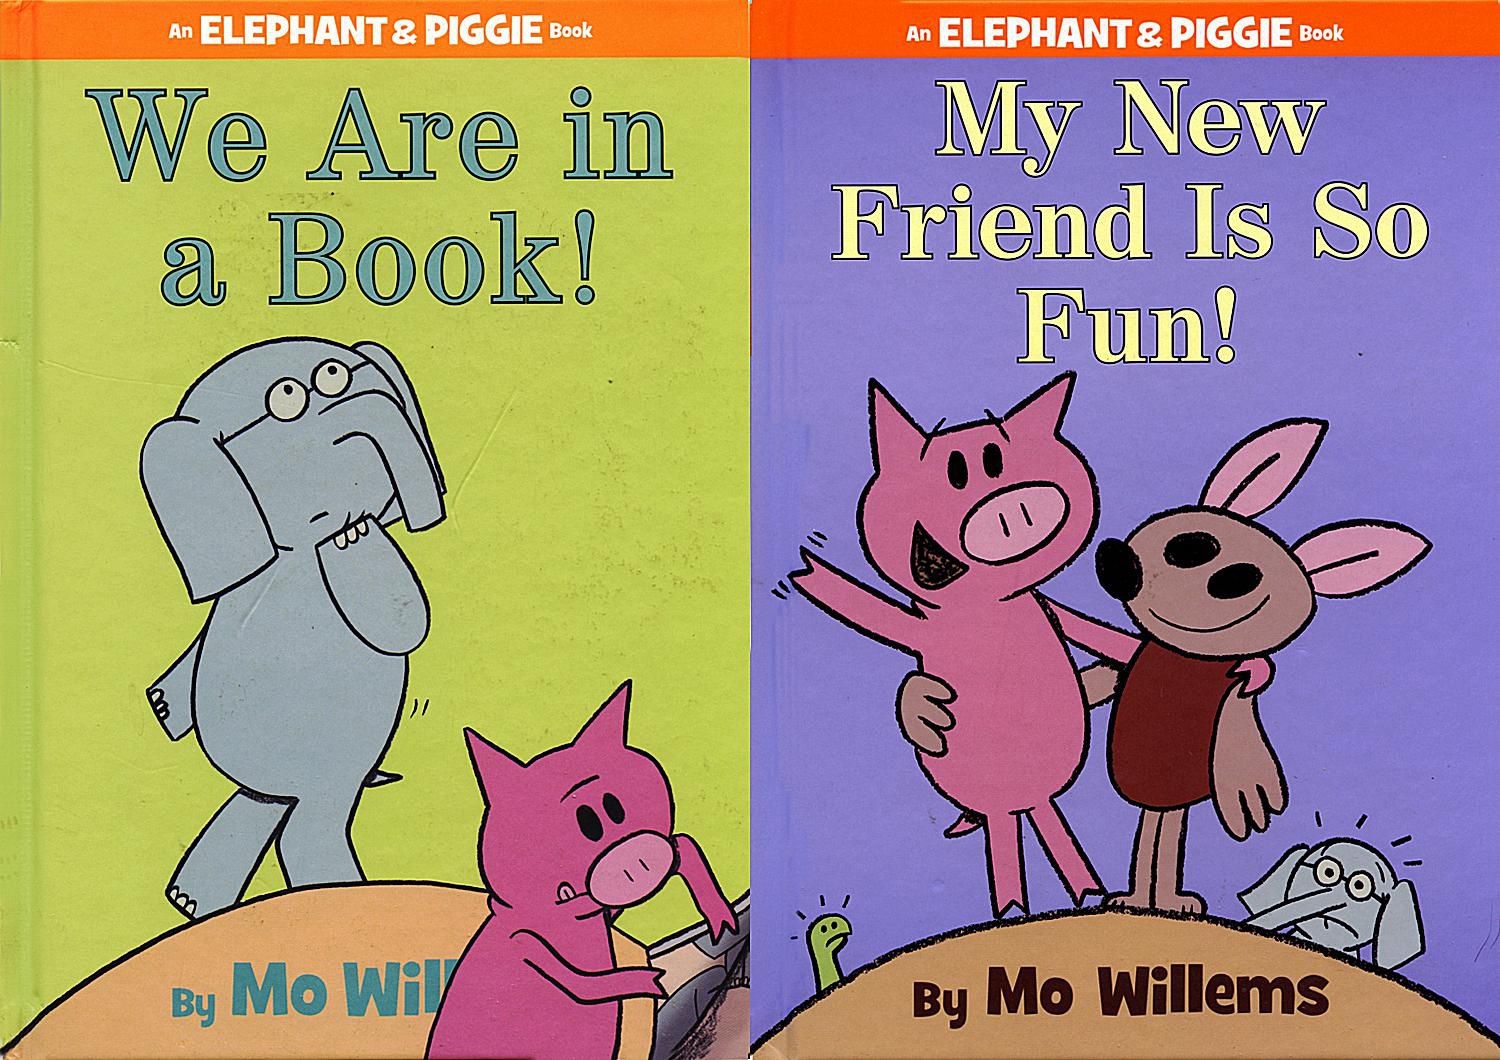 all-25-elephant-and-piggie-books-by-mo-willems